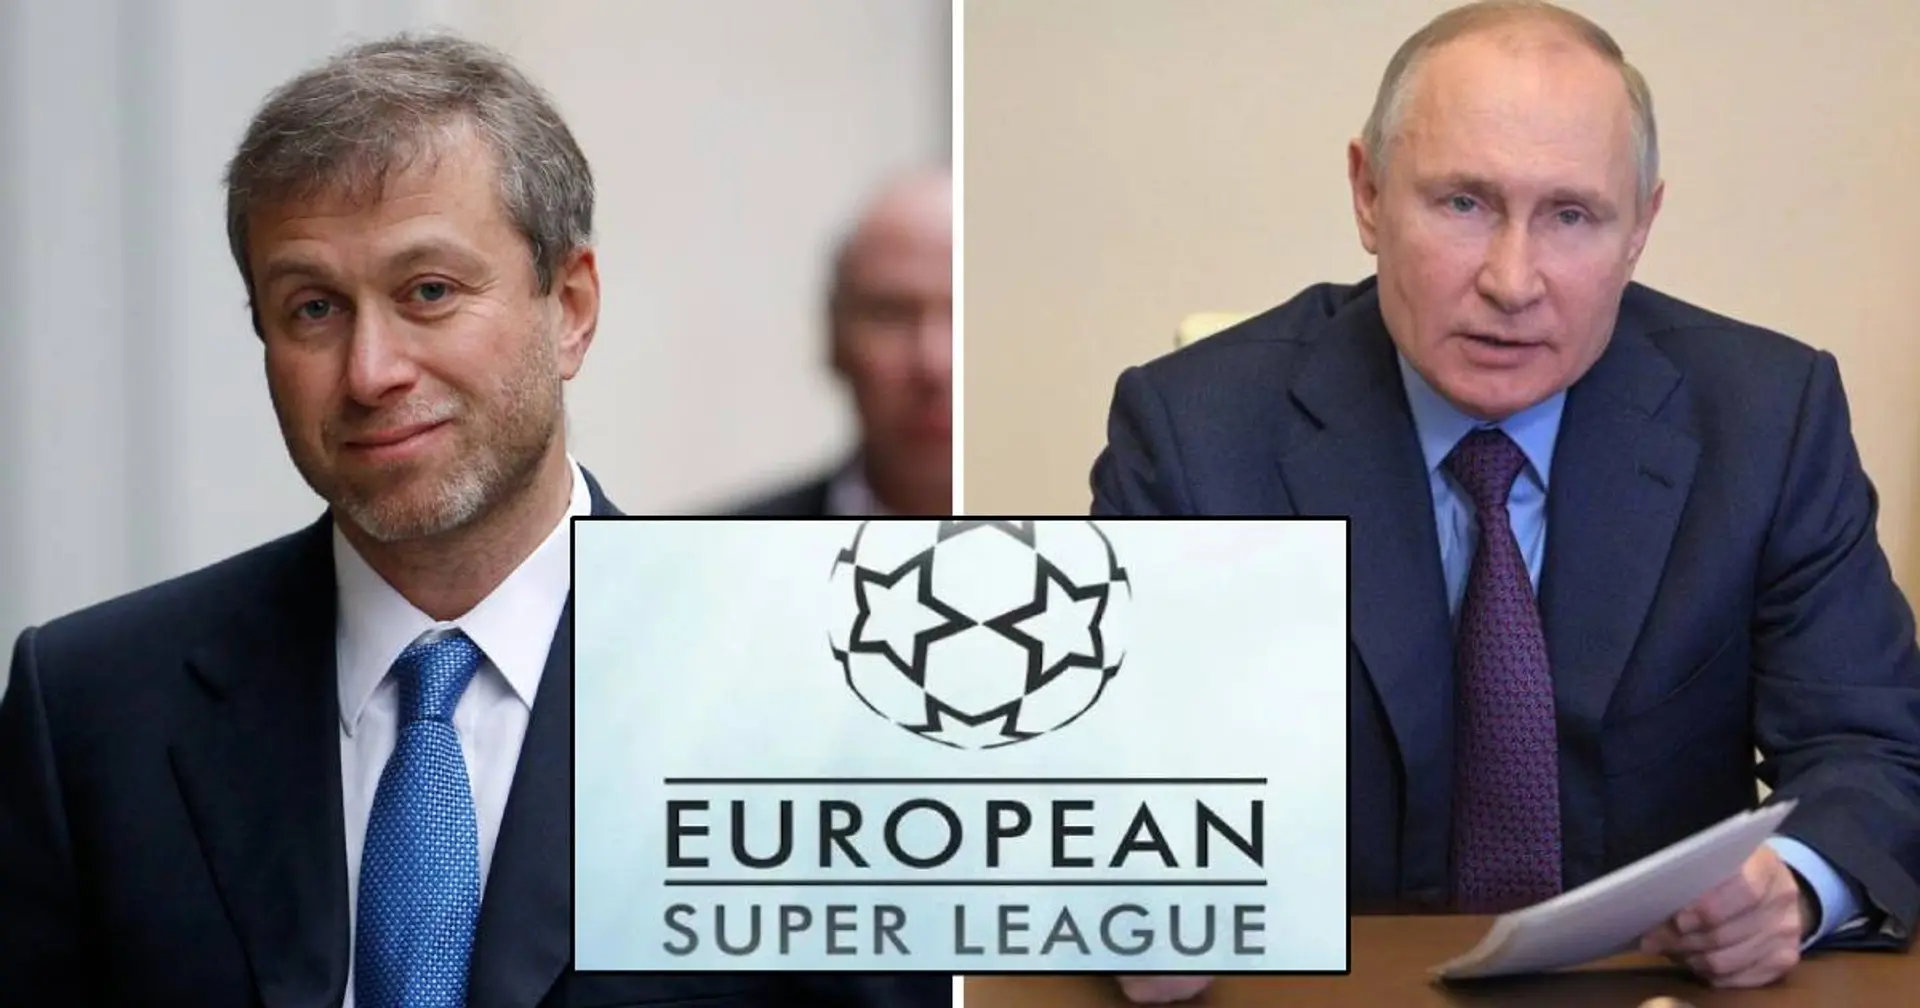 Putin reportedly behind Chelsea withdrawal from Super League for 3 key reasons